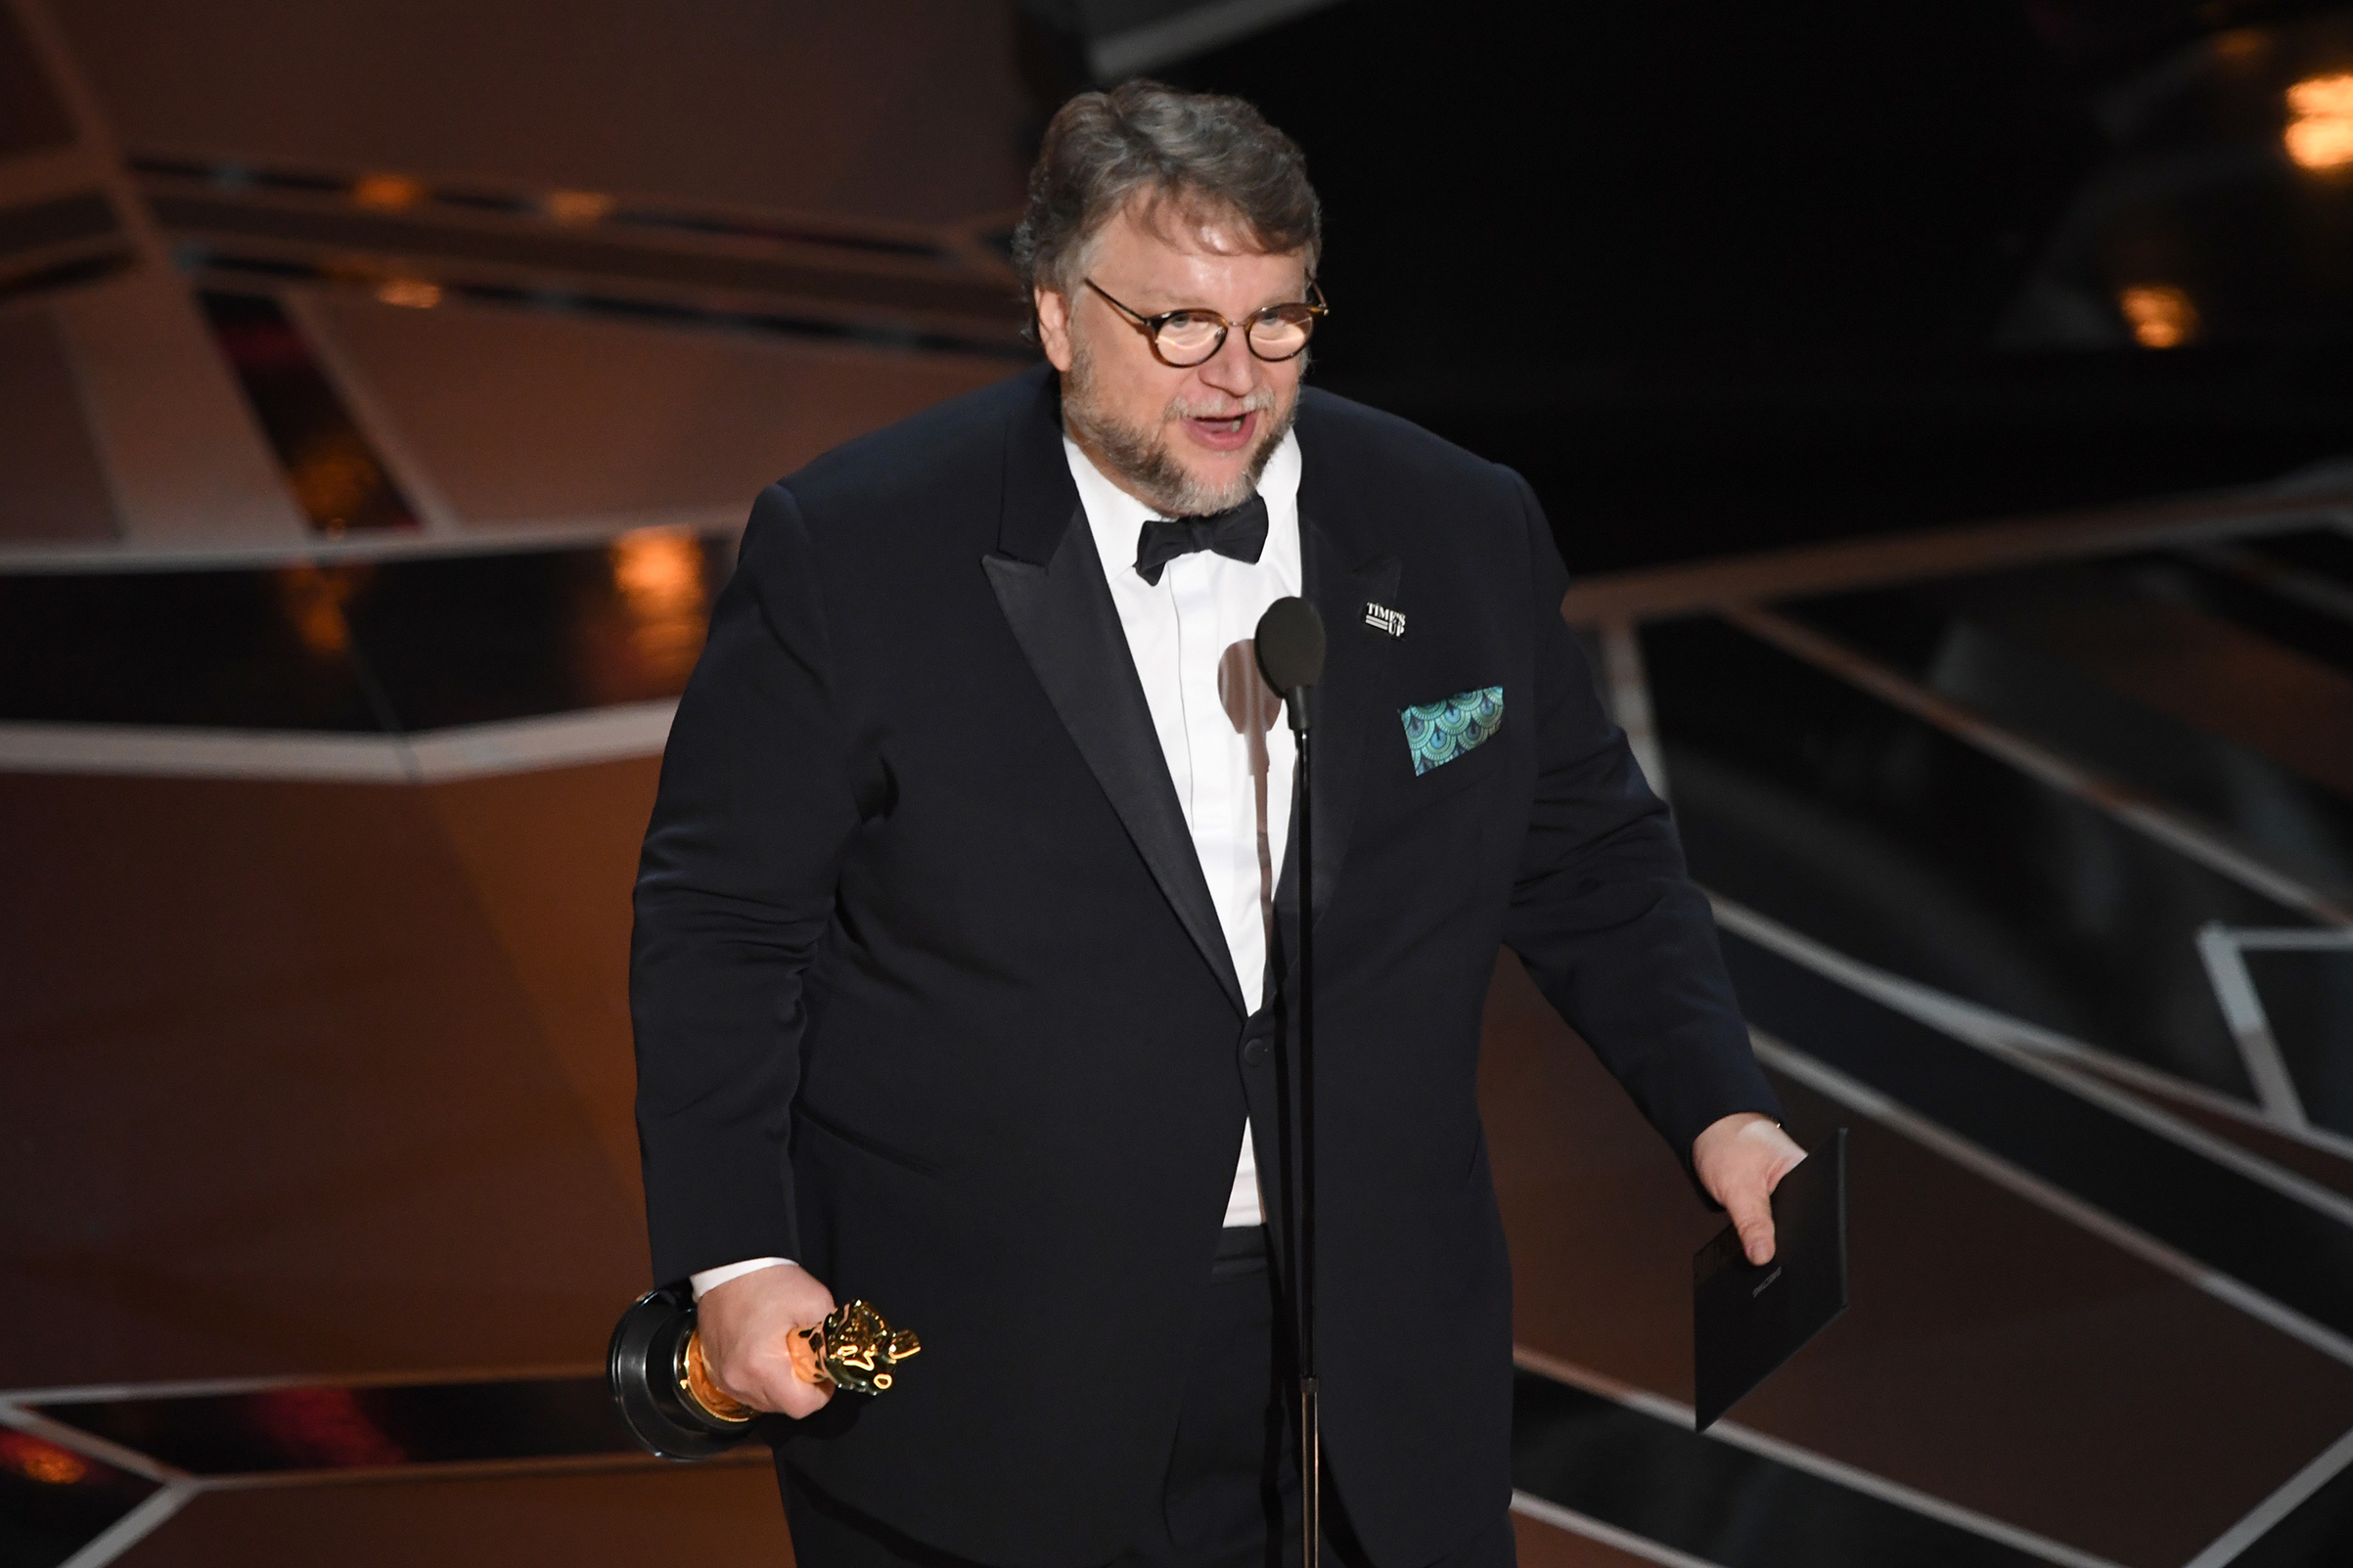 Director Guillermo del Toro delivers a speech after he won the Oscar for Best Director for "The Shape of Water" during the 90th Annual Academy Awards show on March 4, 2018 in Hollywood. (Mark Ralston—AFP/Getty Images)